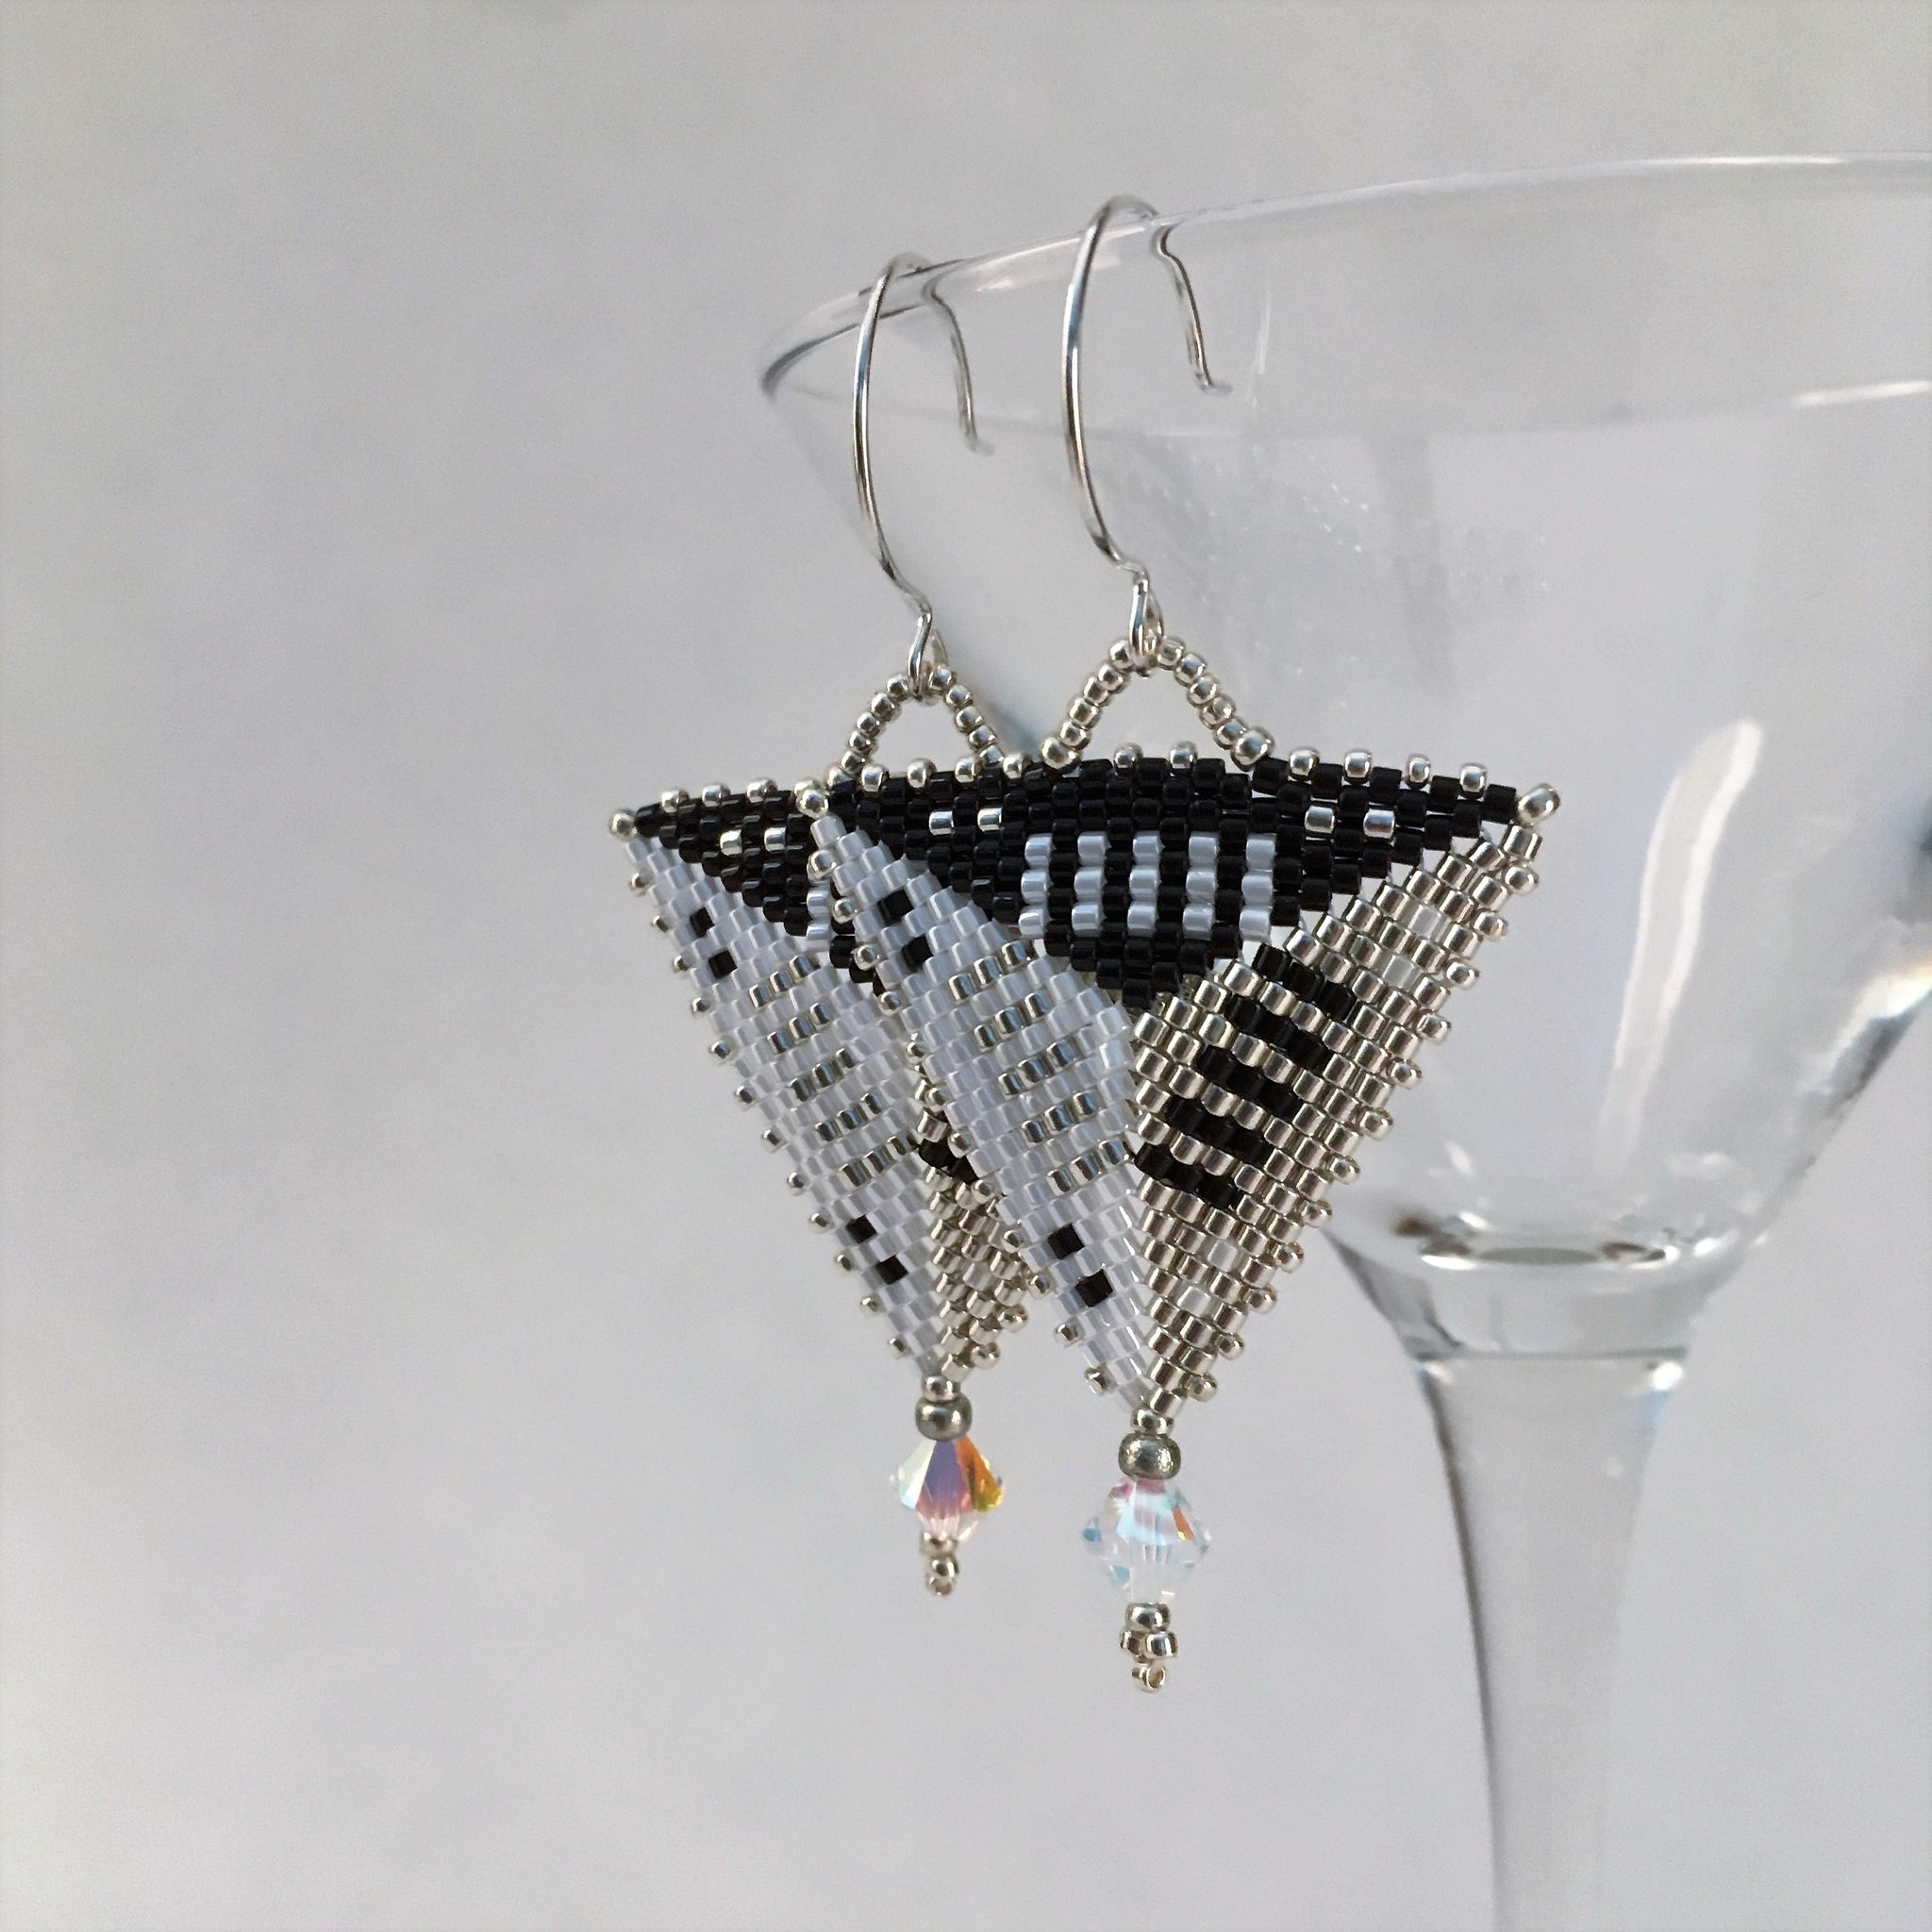 Sterling Wine Glasses Earrings With Swarovski Crystals 